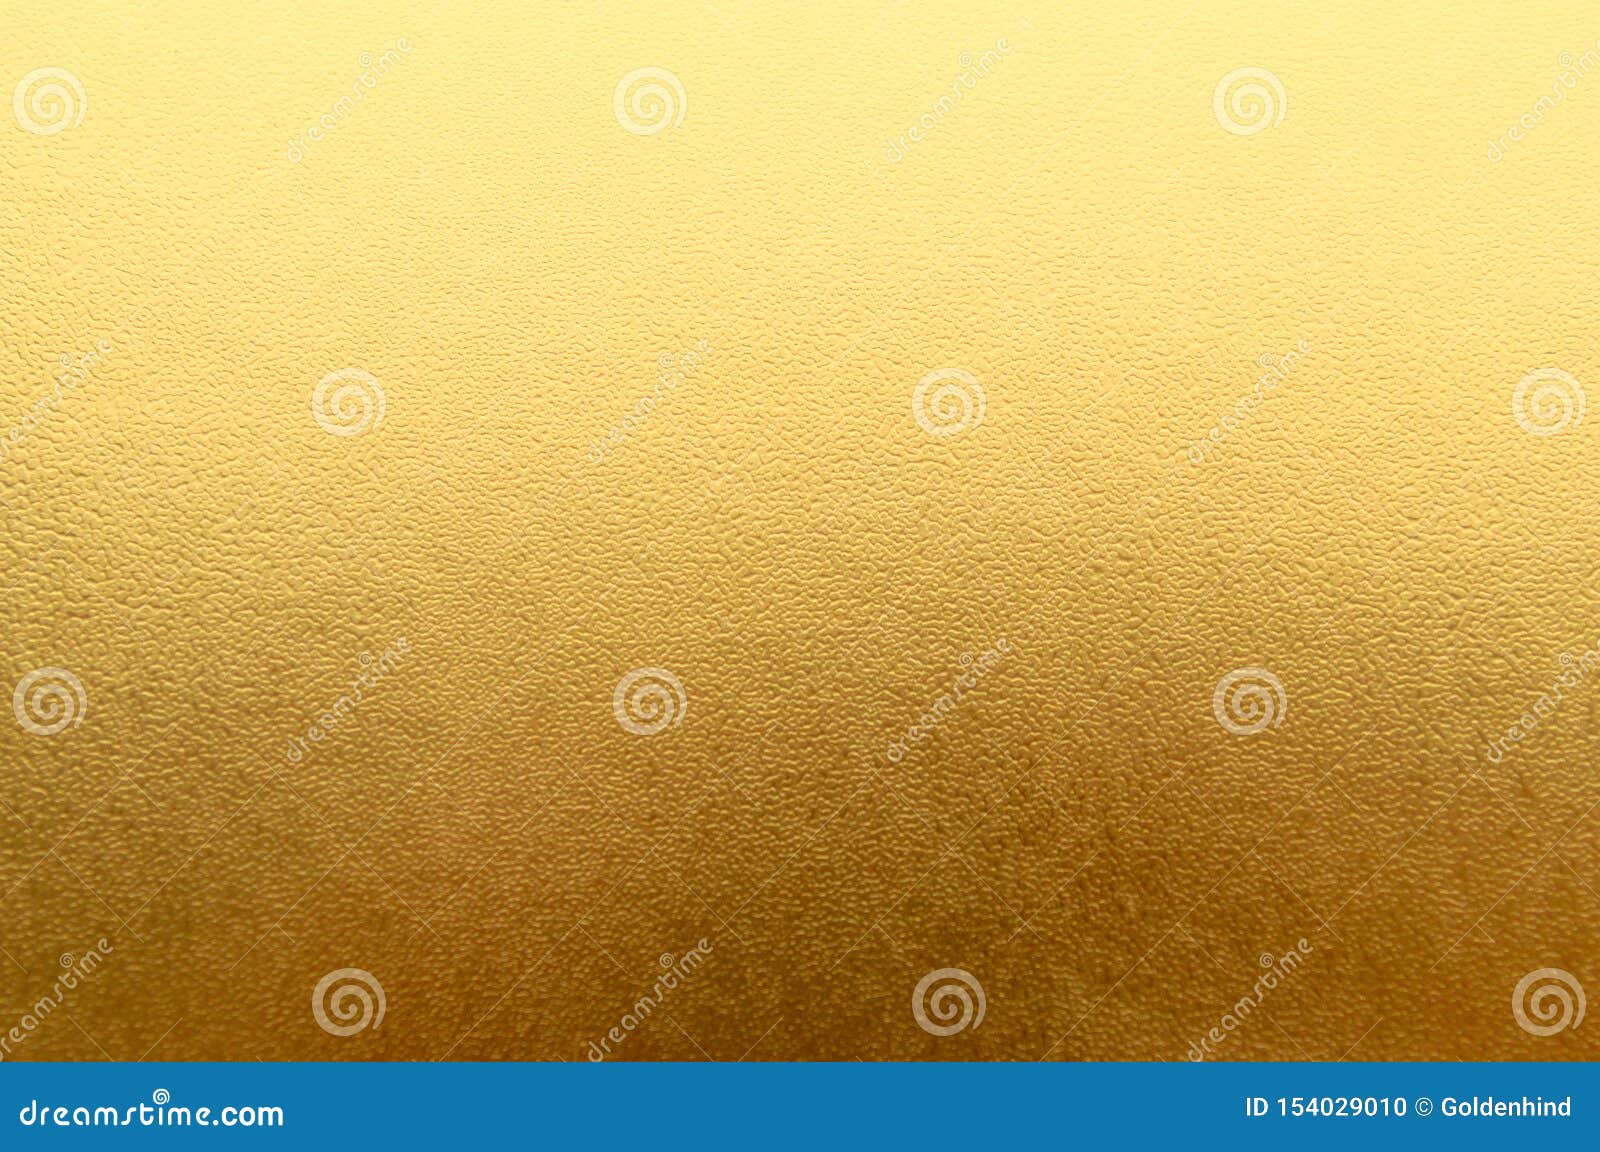 Gold Foil Texture Background Stock Photo, Picture and Royalty Free Image.  Image 65073600.